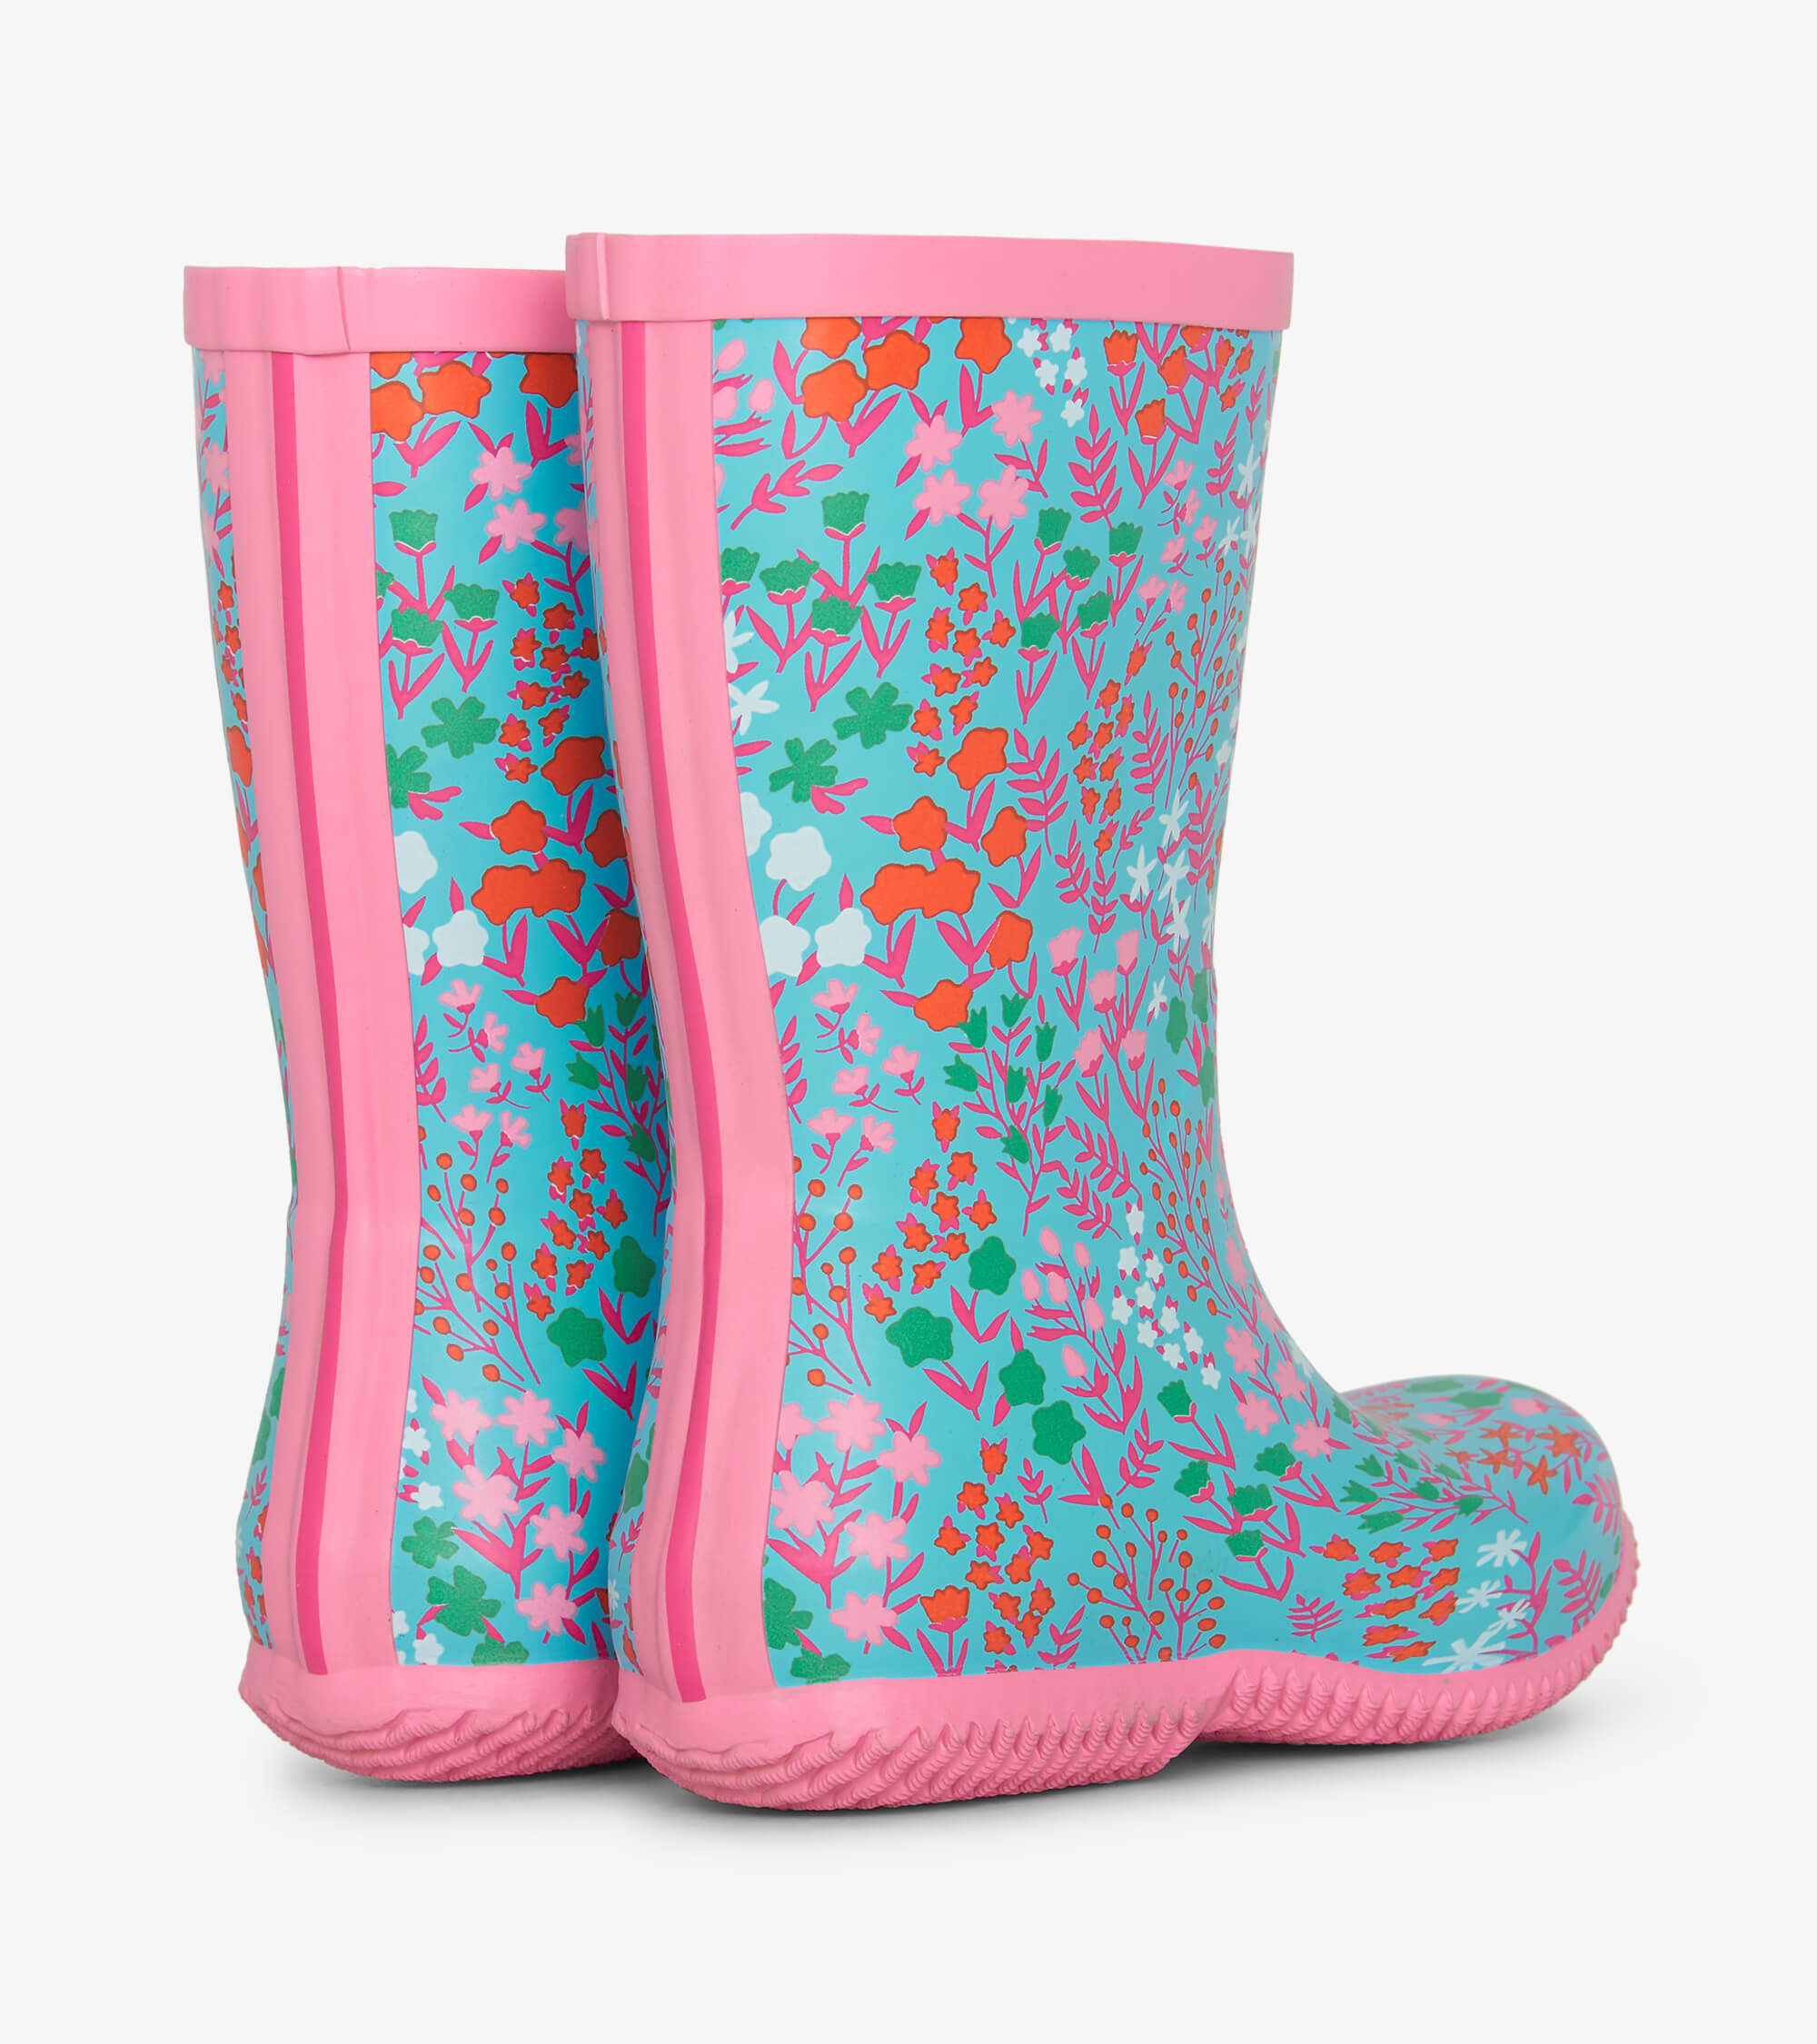 Ditsy Floral Packable Rain Boots